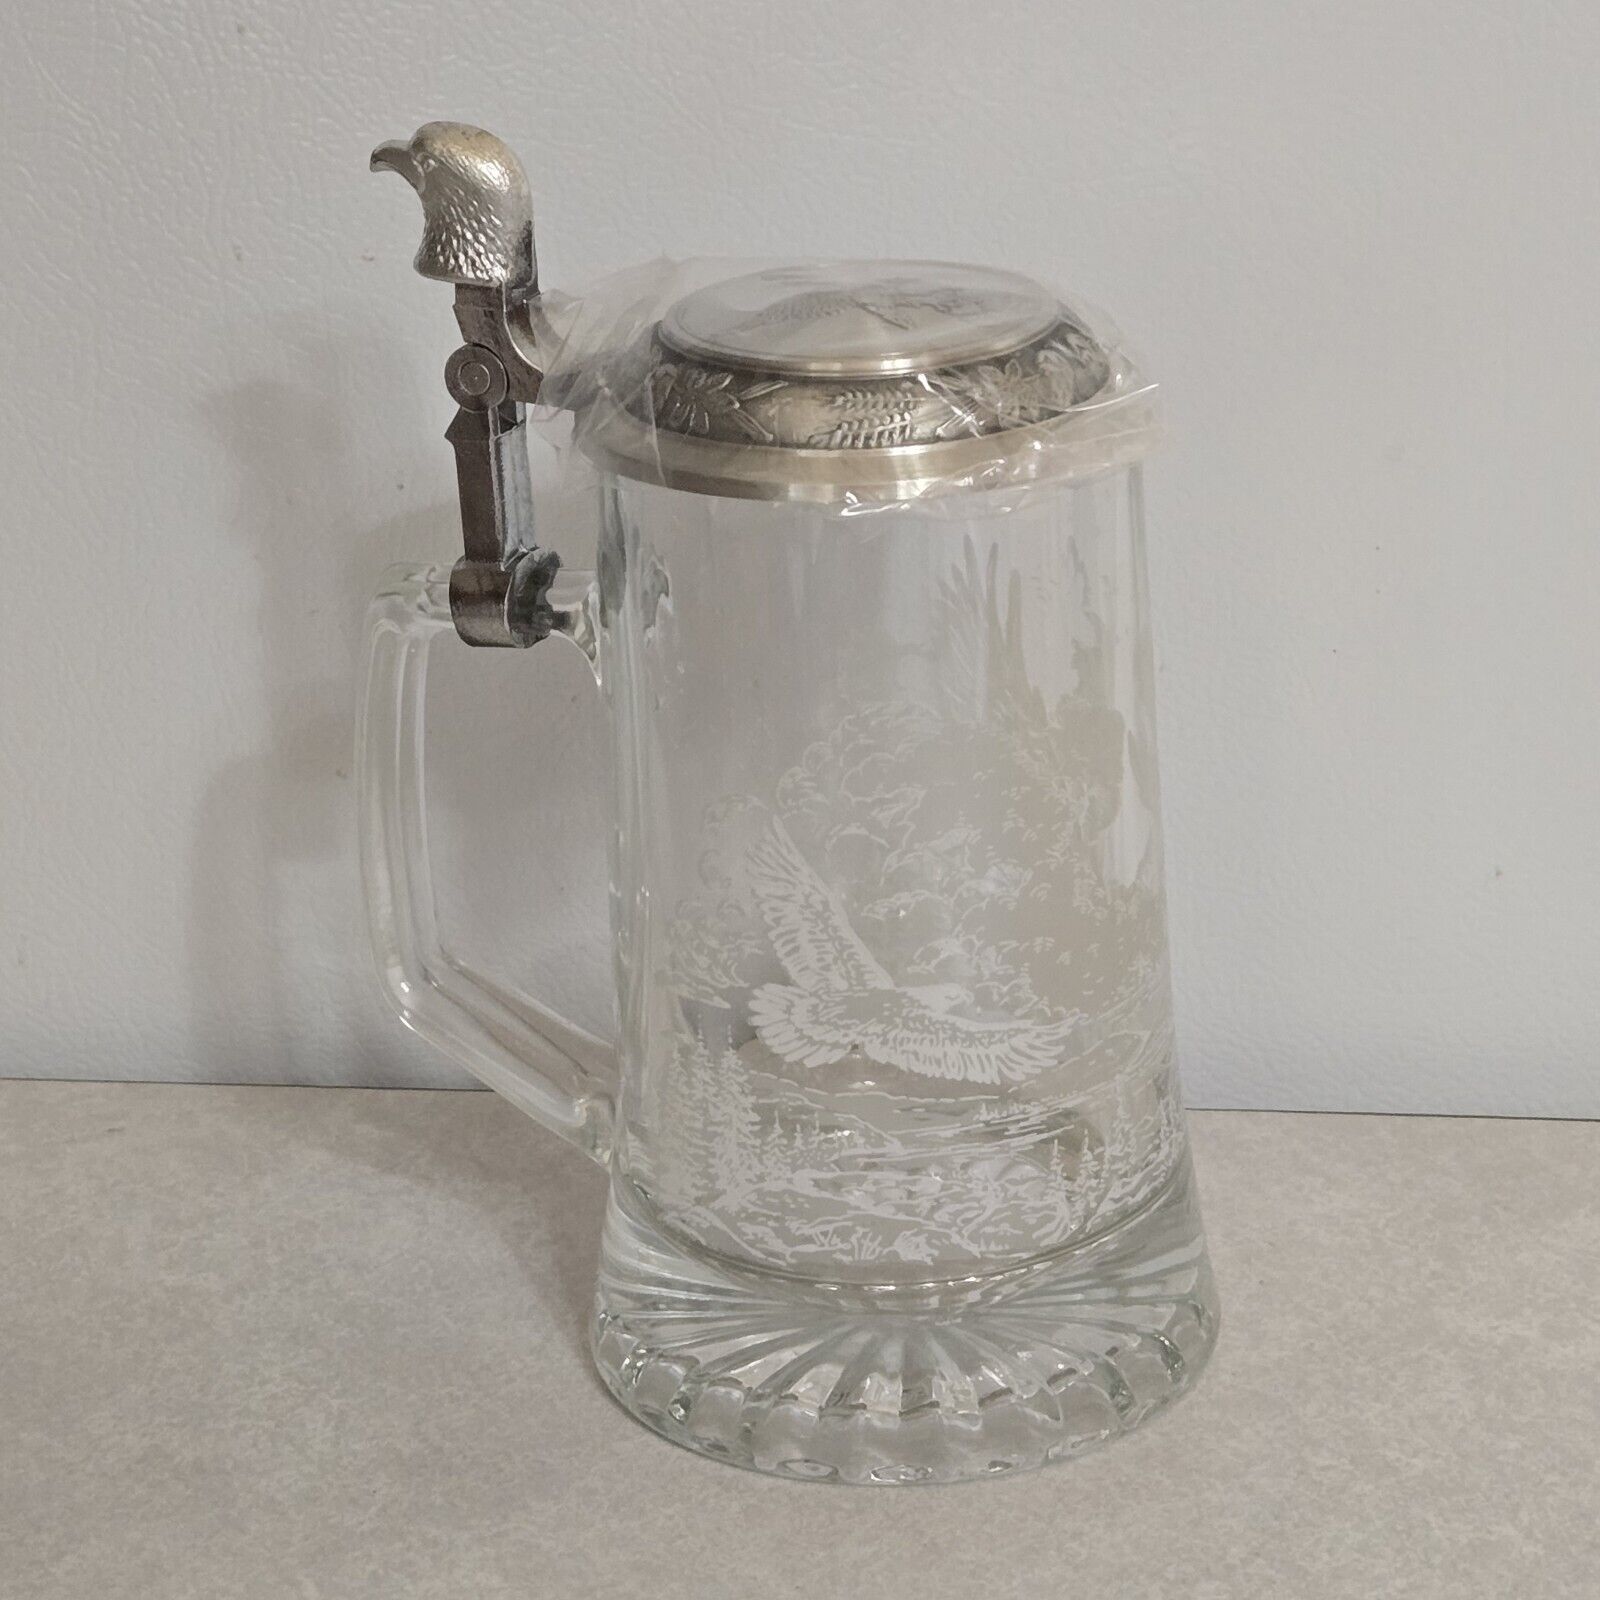 AVON American Eagle Etched Glass TANKARD w/ Pewter Lid 1997 Beer Stein 